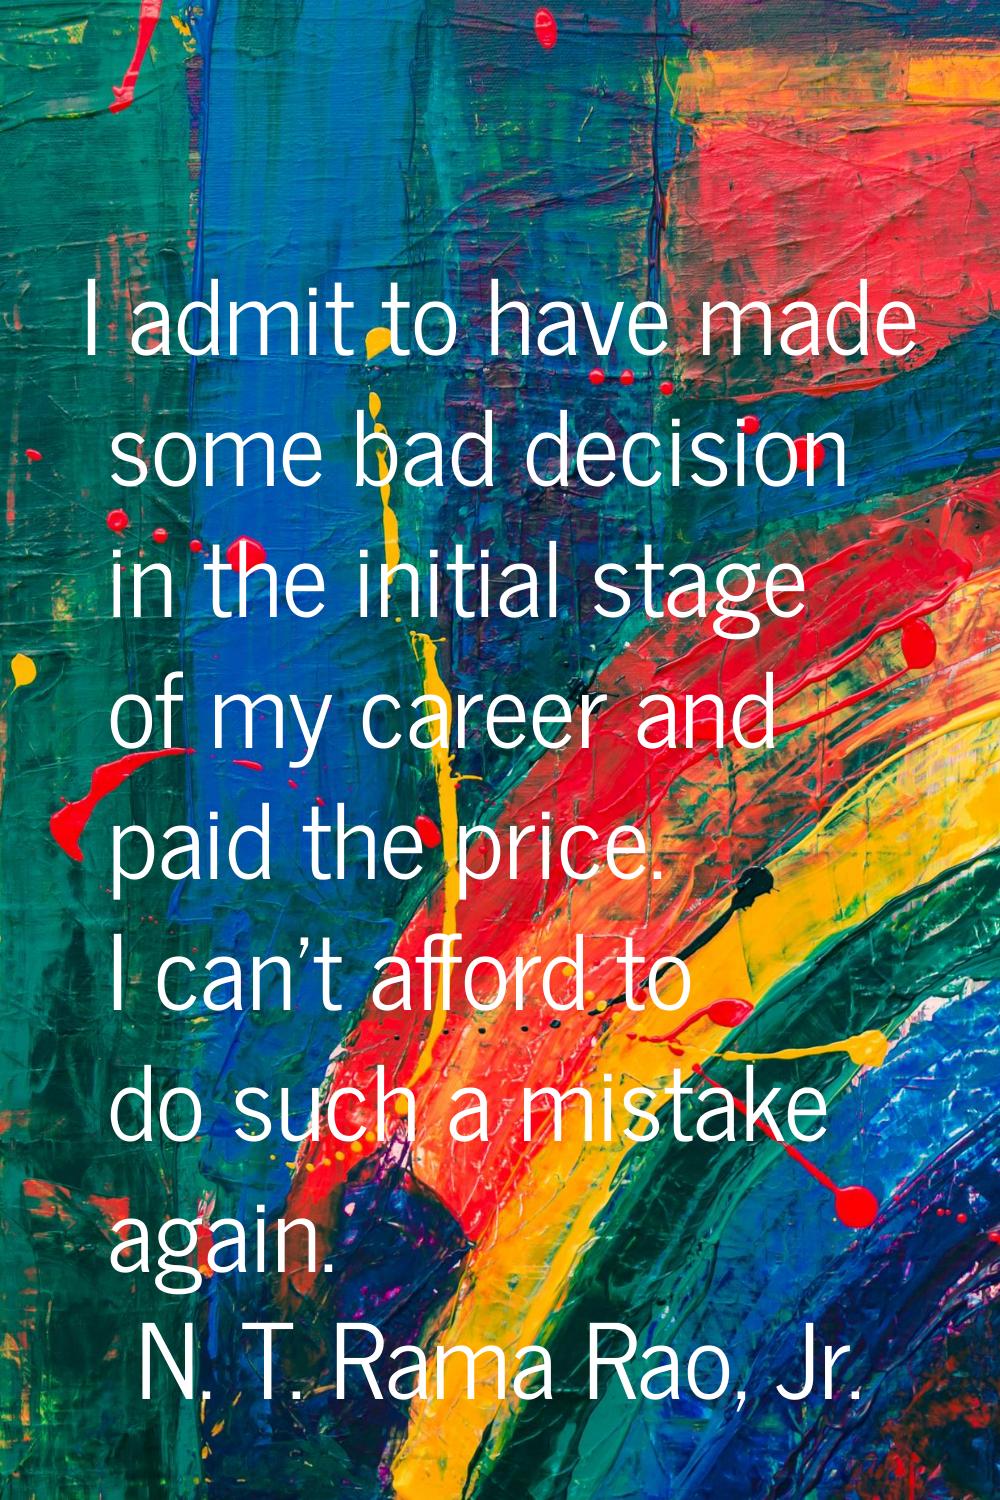 I admit to have made some bad decision in the initial stage of my career and paid the price. I can'